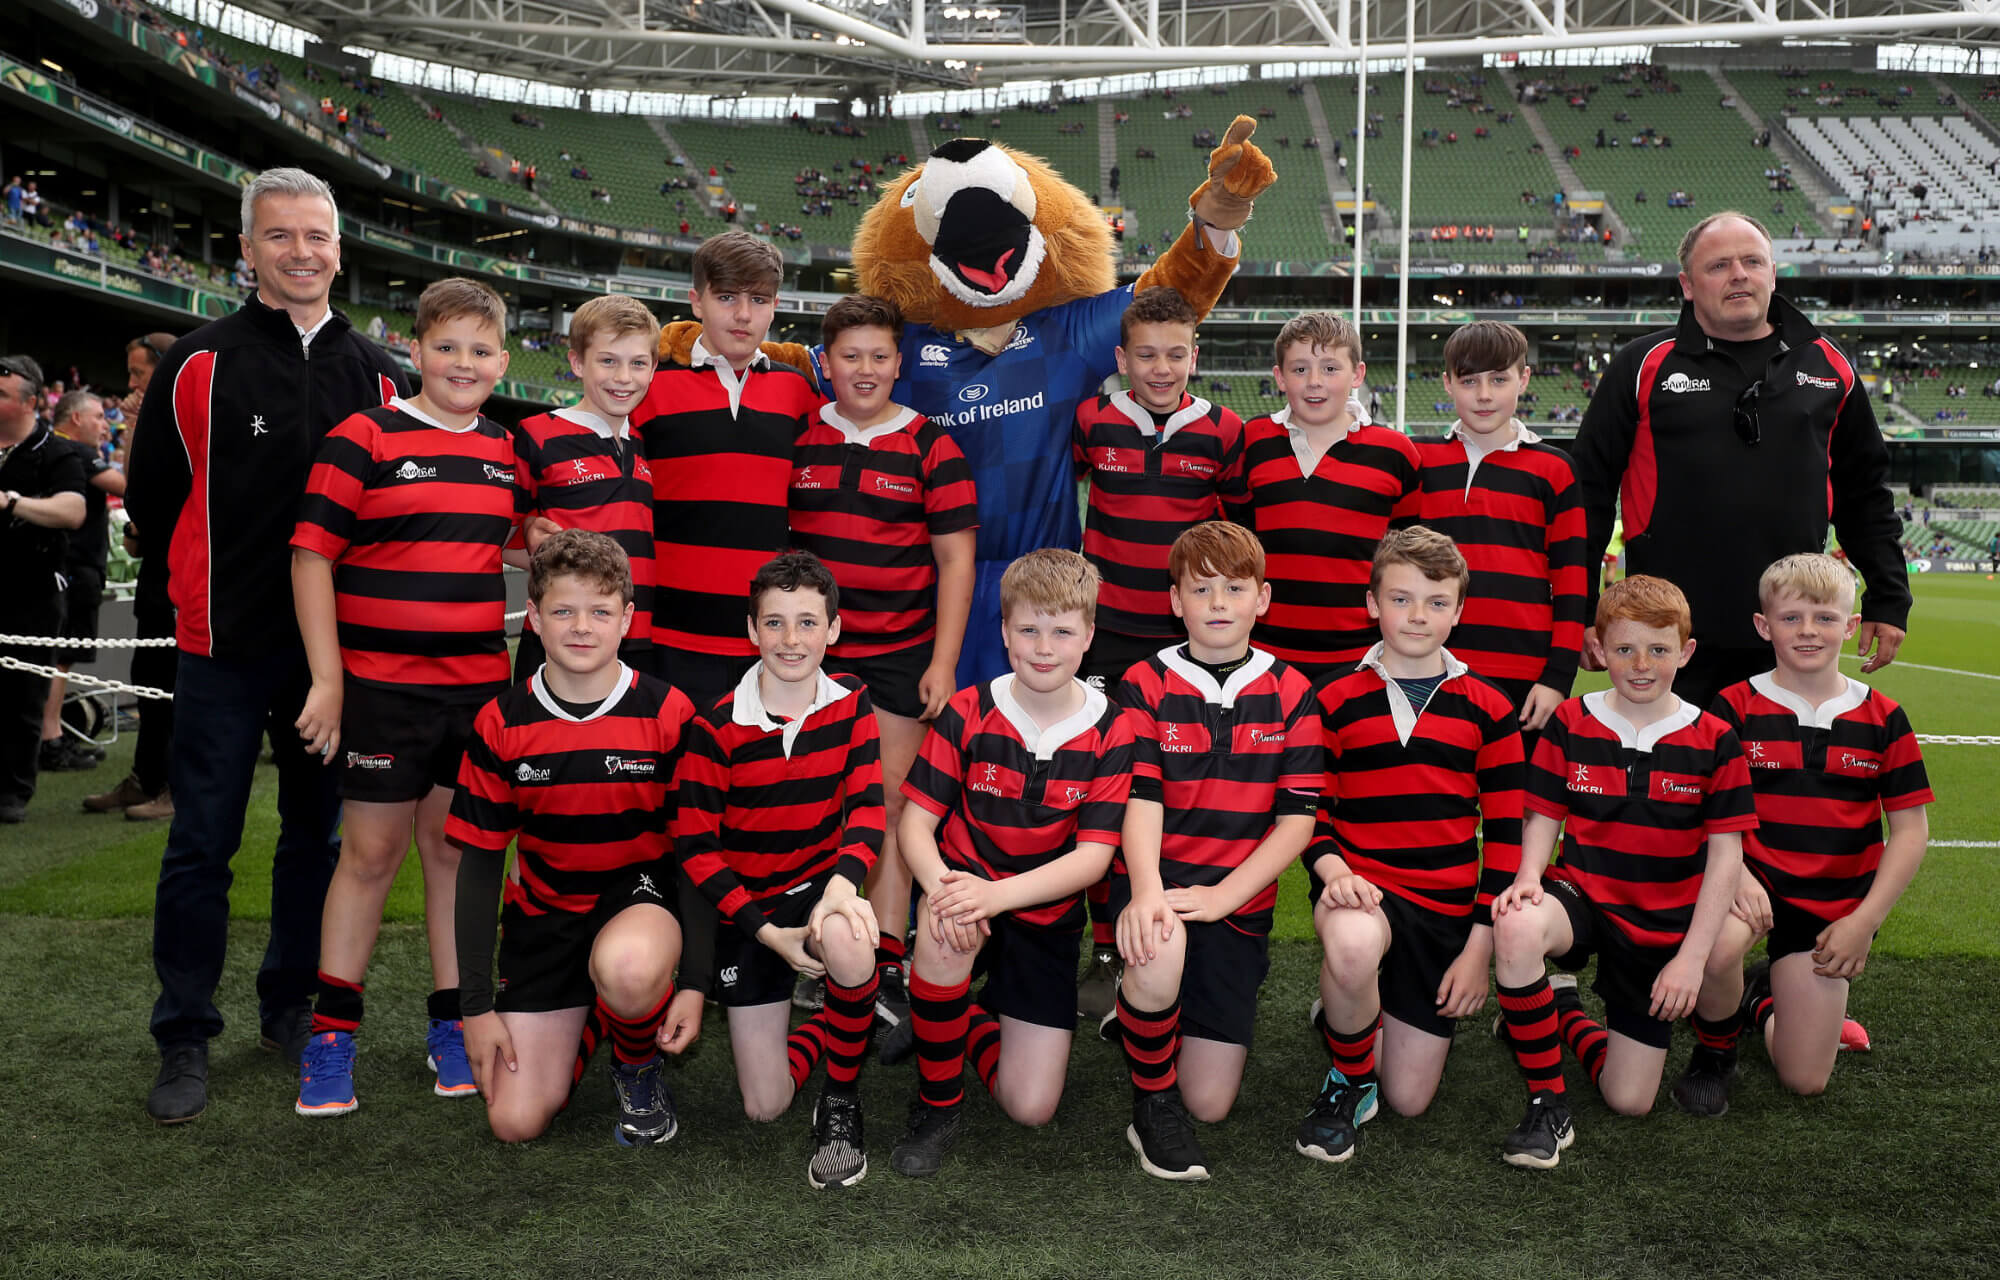 City of Armagh Pro14 Rugby Team at Aviva Stadium 